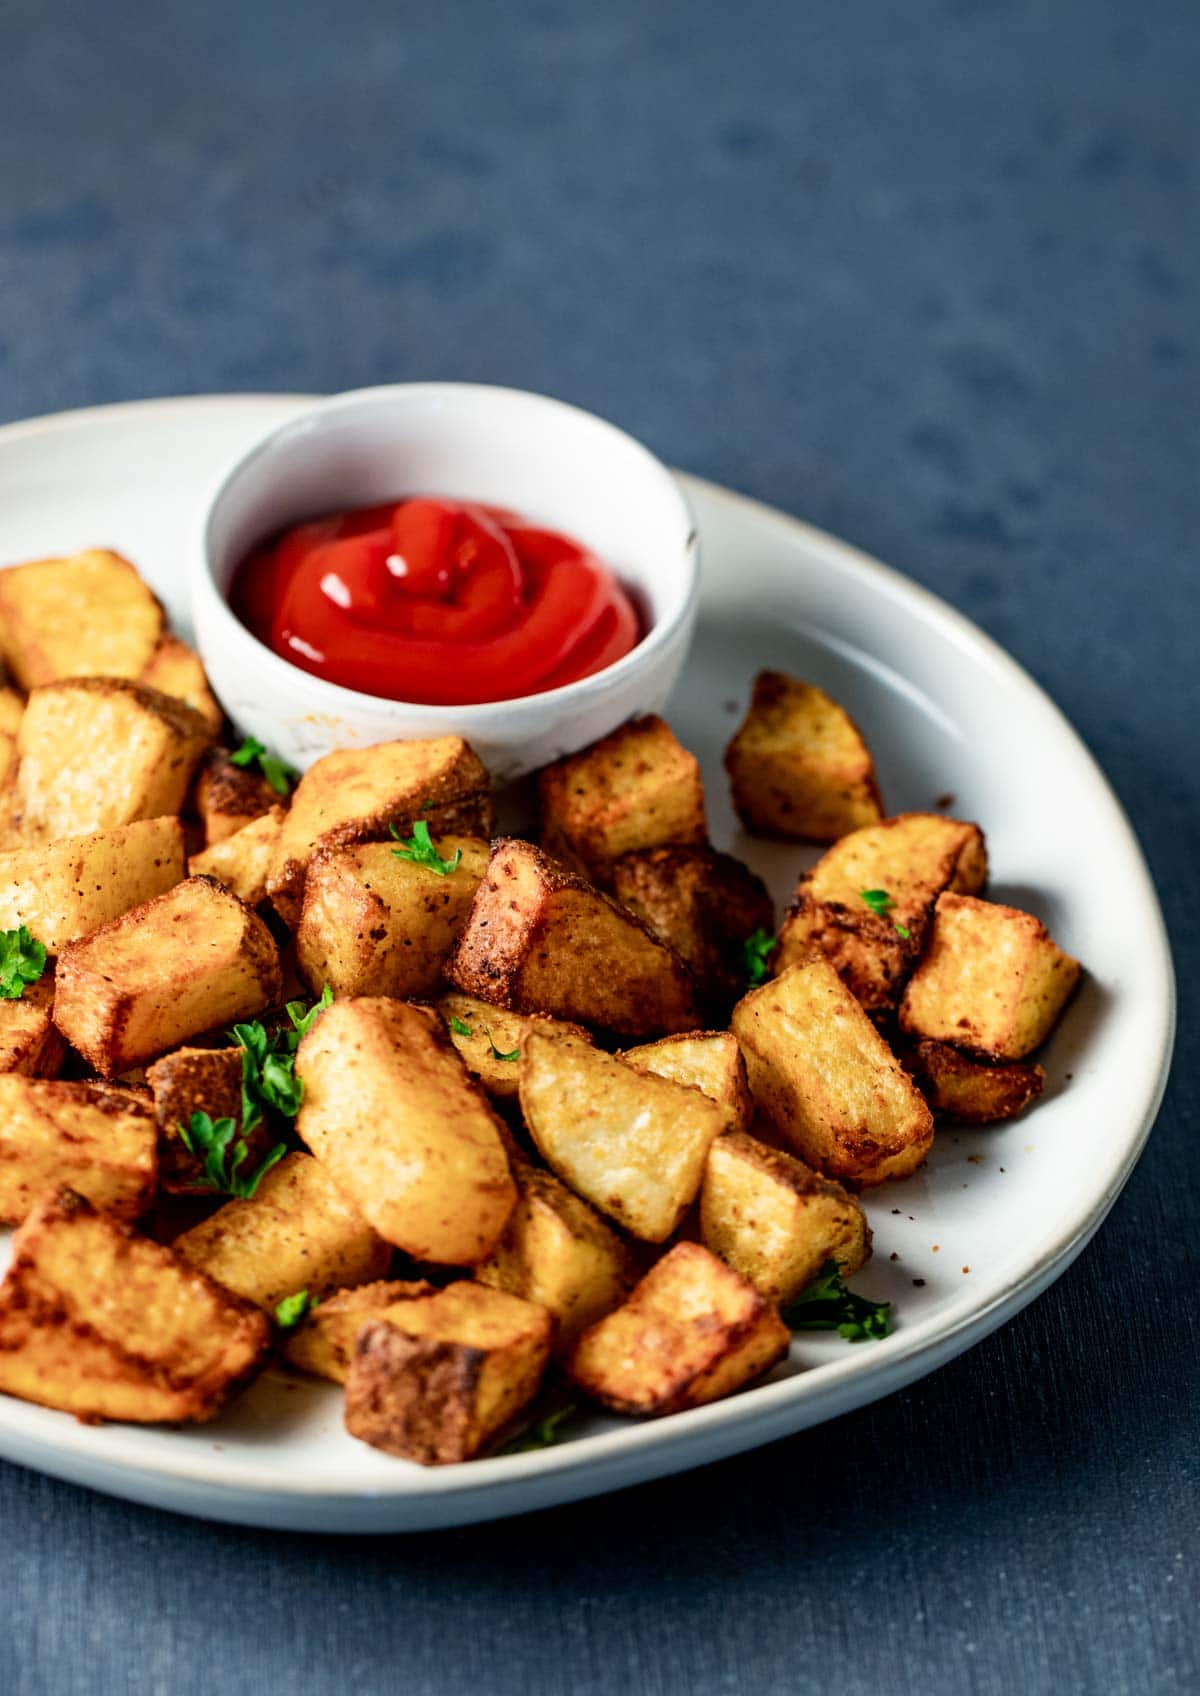 Side view of home fries on a plate with ketchup on the side.